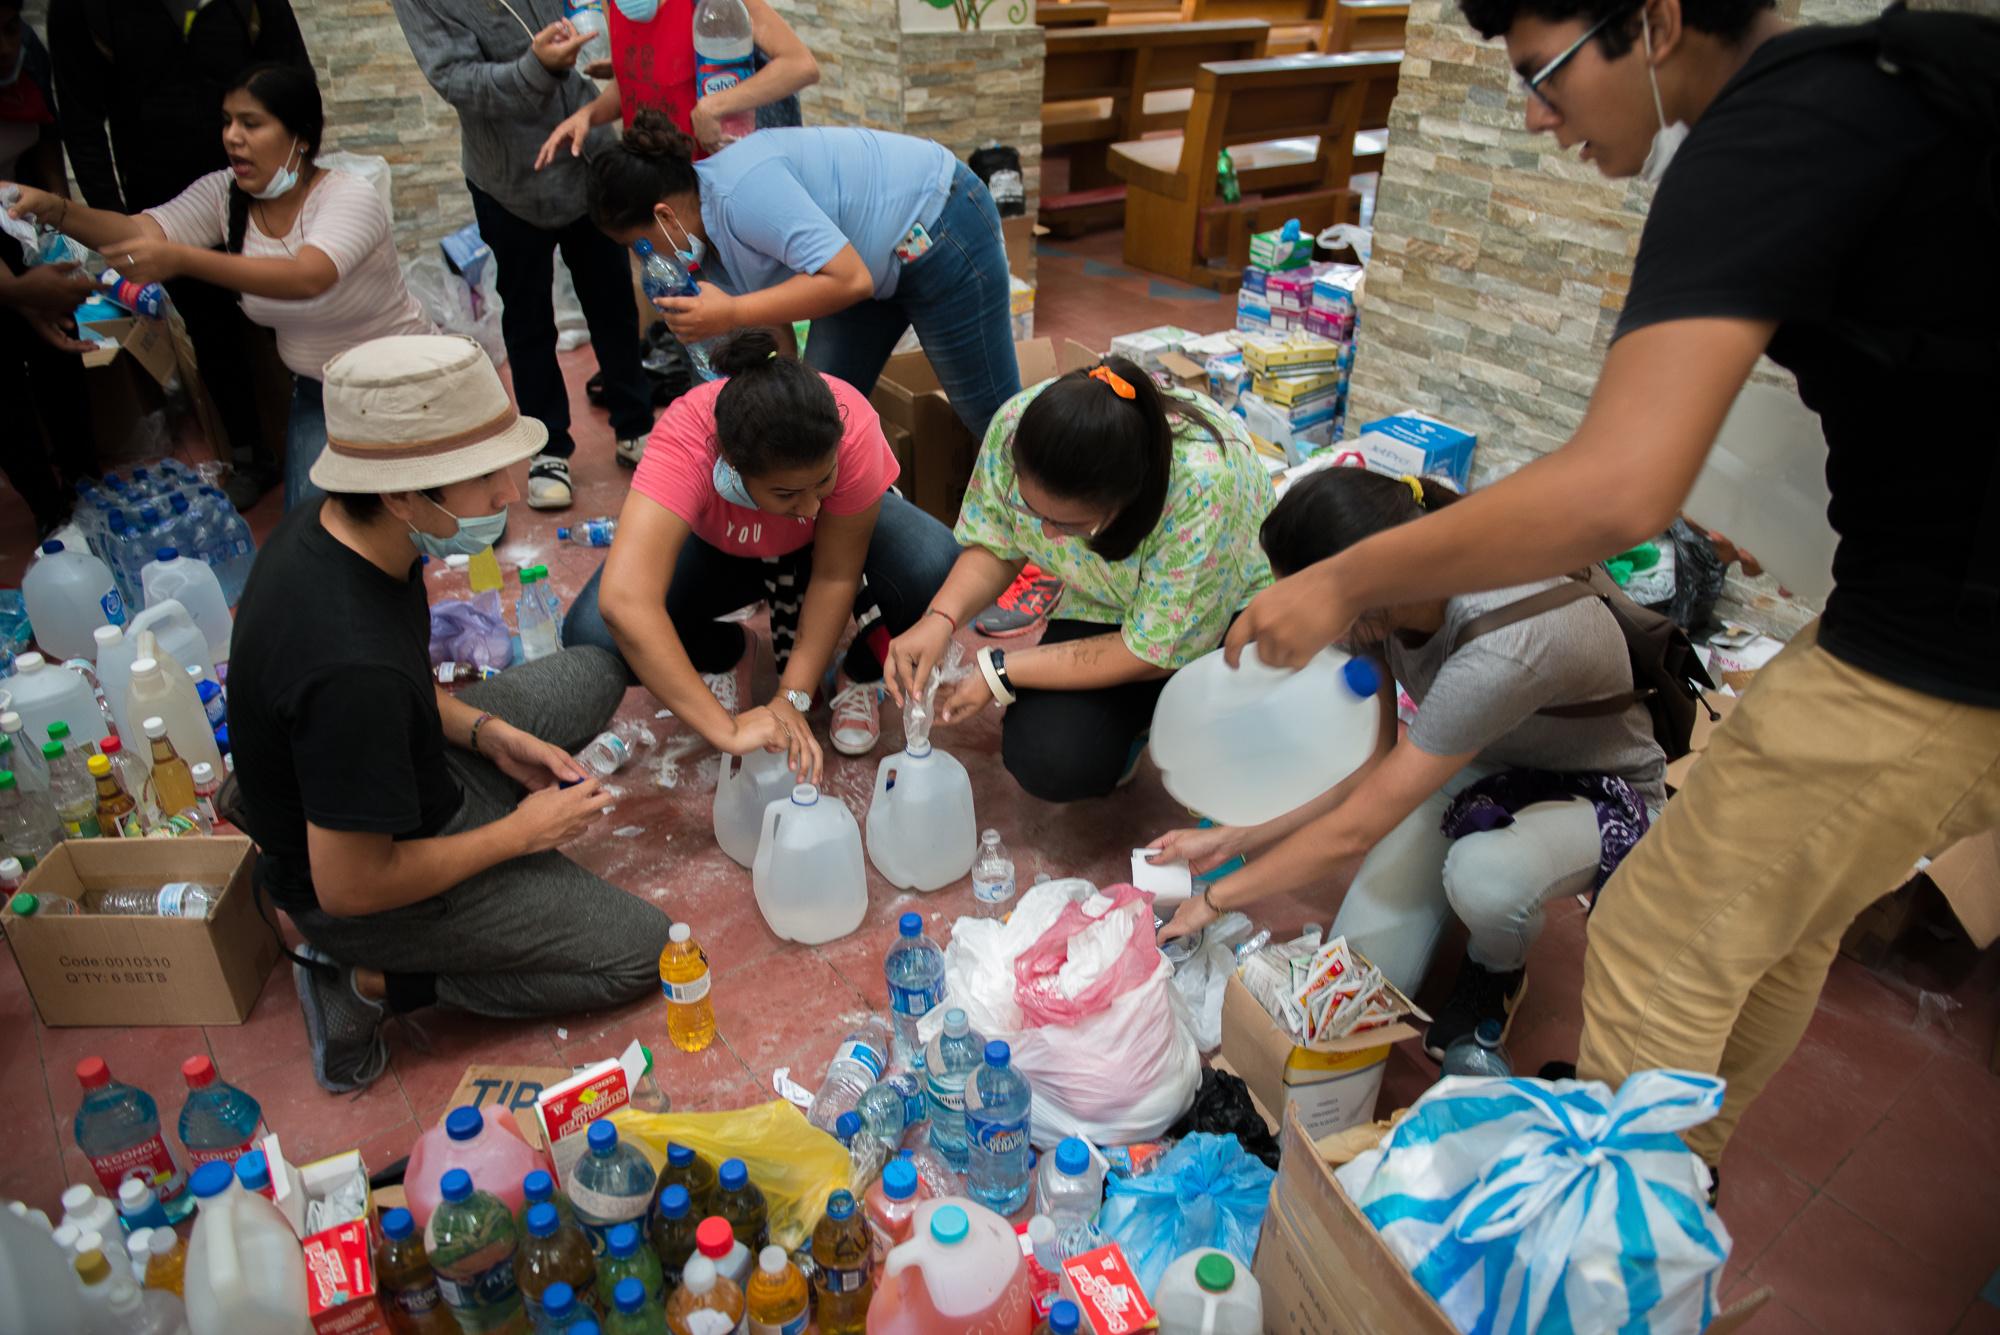 Medical students prepare bottles of a solution to counter the effects of tear gas inside the cathedral of Managua during clashes with police....